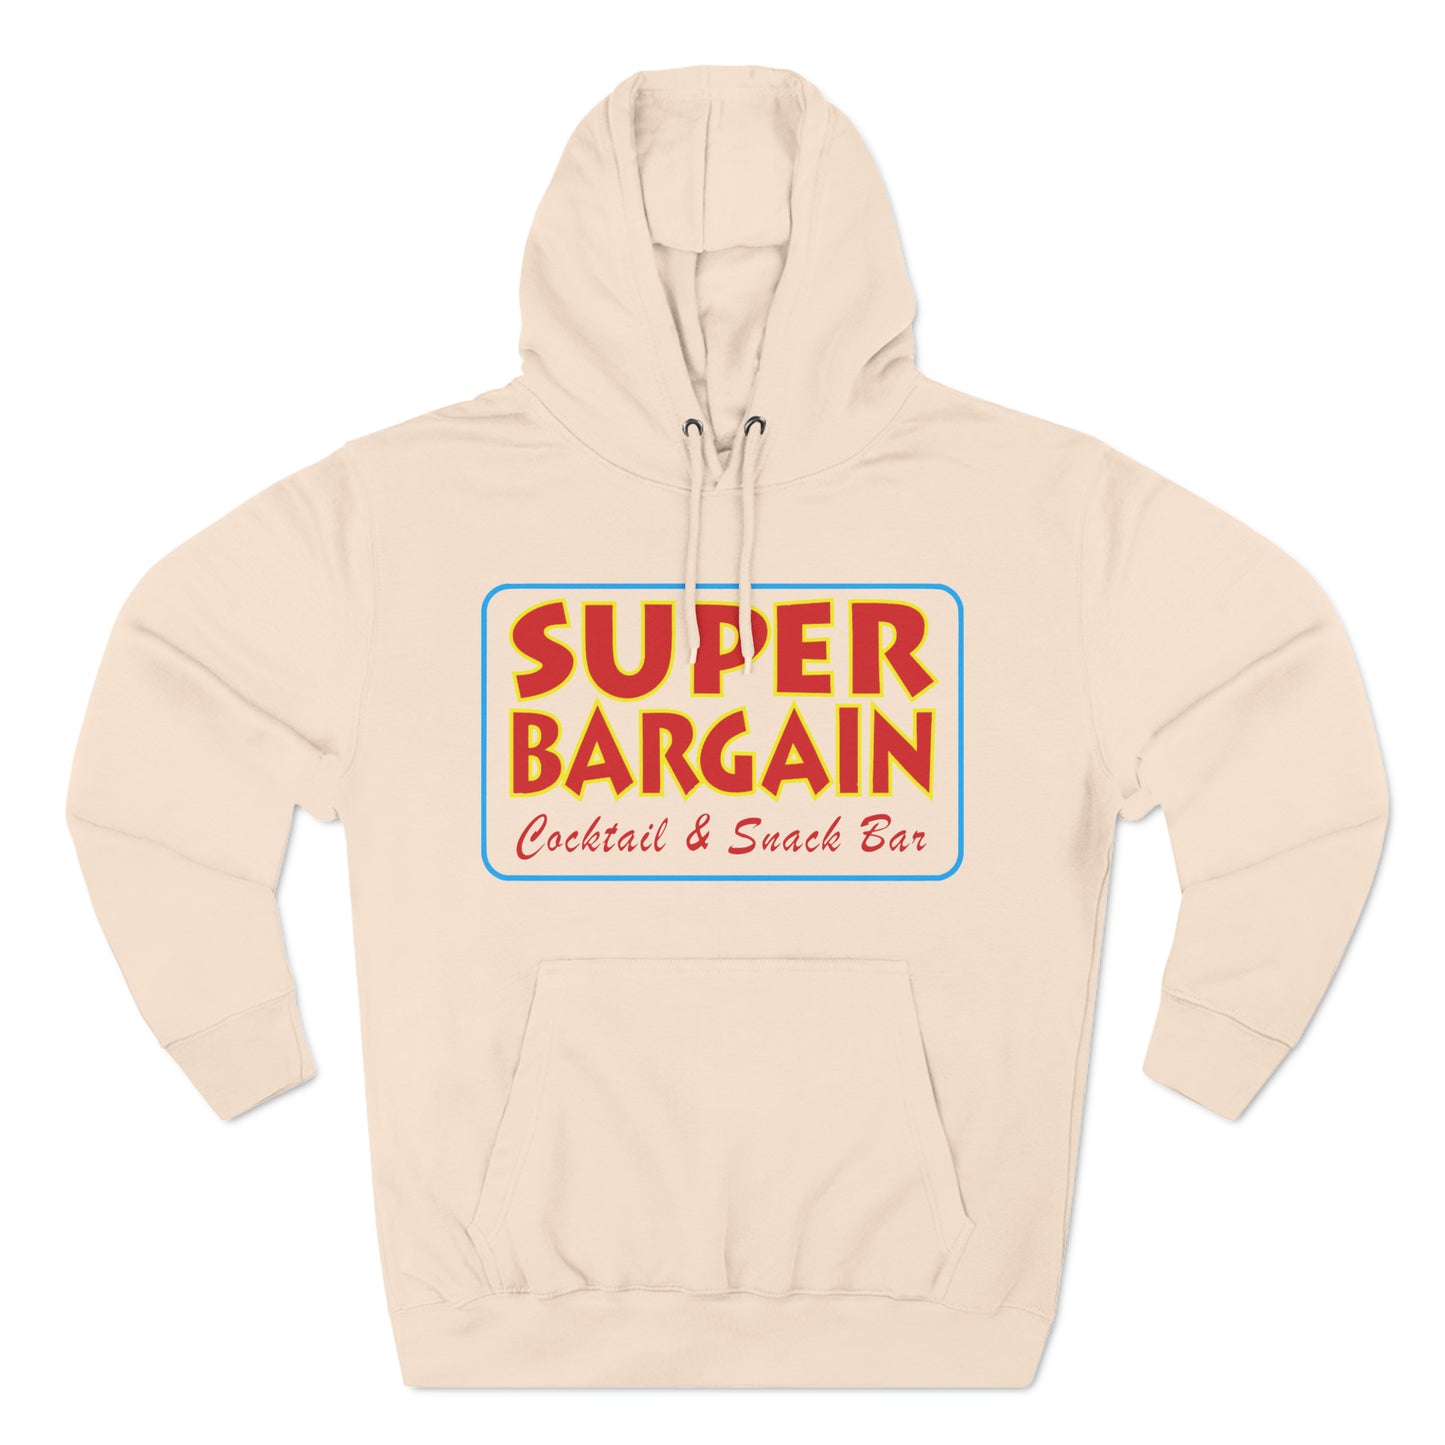 A beige Unisex Premium Pullover Hoodie printed with the words "SUPER BARGAIN Cocktail & Snack Bar, Cabbagetown Toronto" in bold red and yellow lettering on the front. The hoodie has a front pouch and the hood's drawstrings are visible.